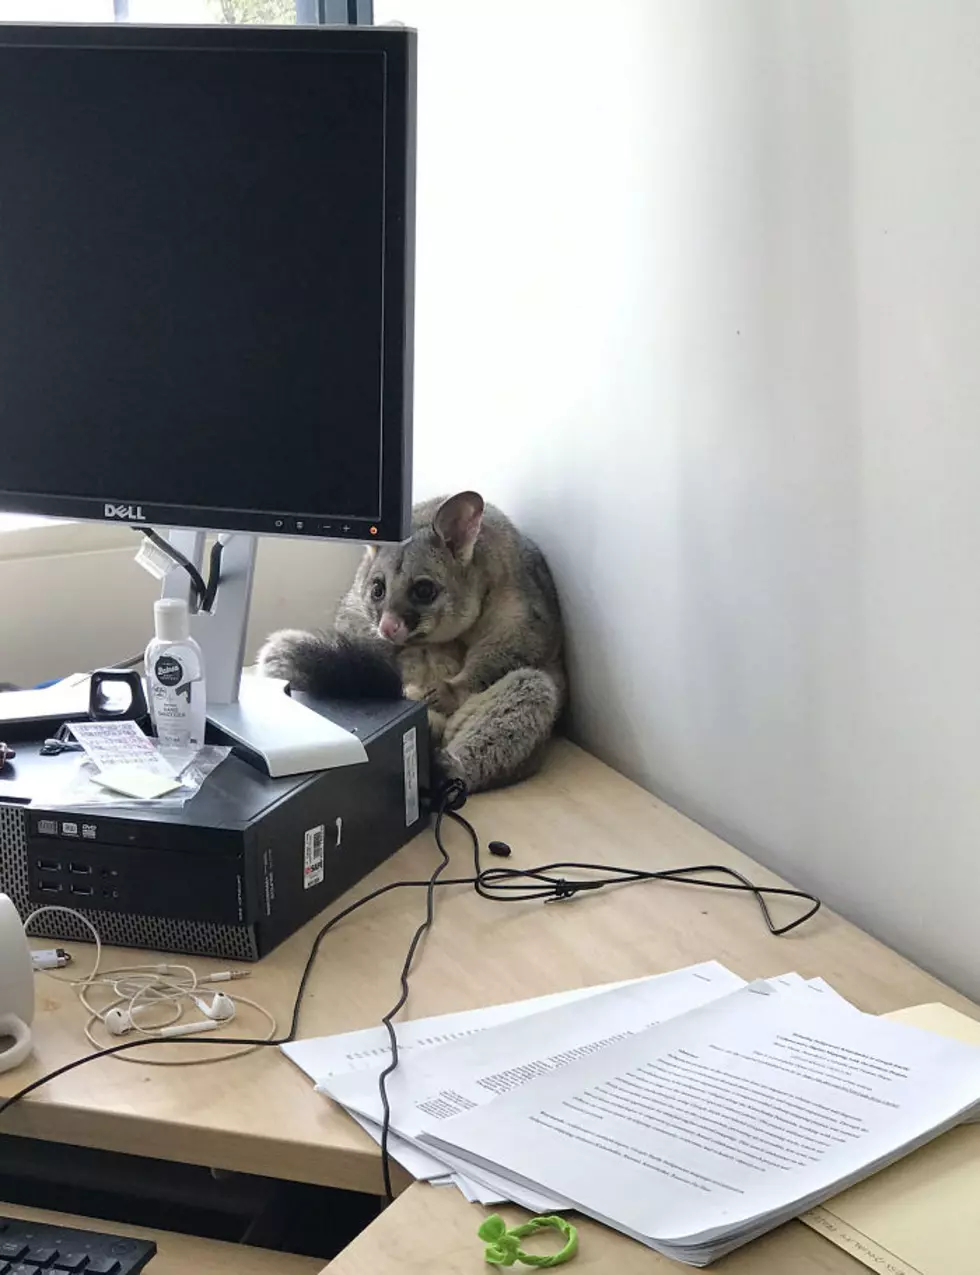 Opossum Trashes Office and Becomes Internet Sensation